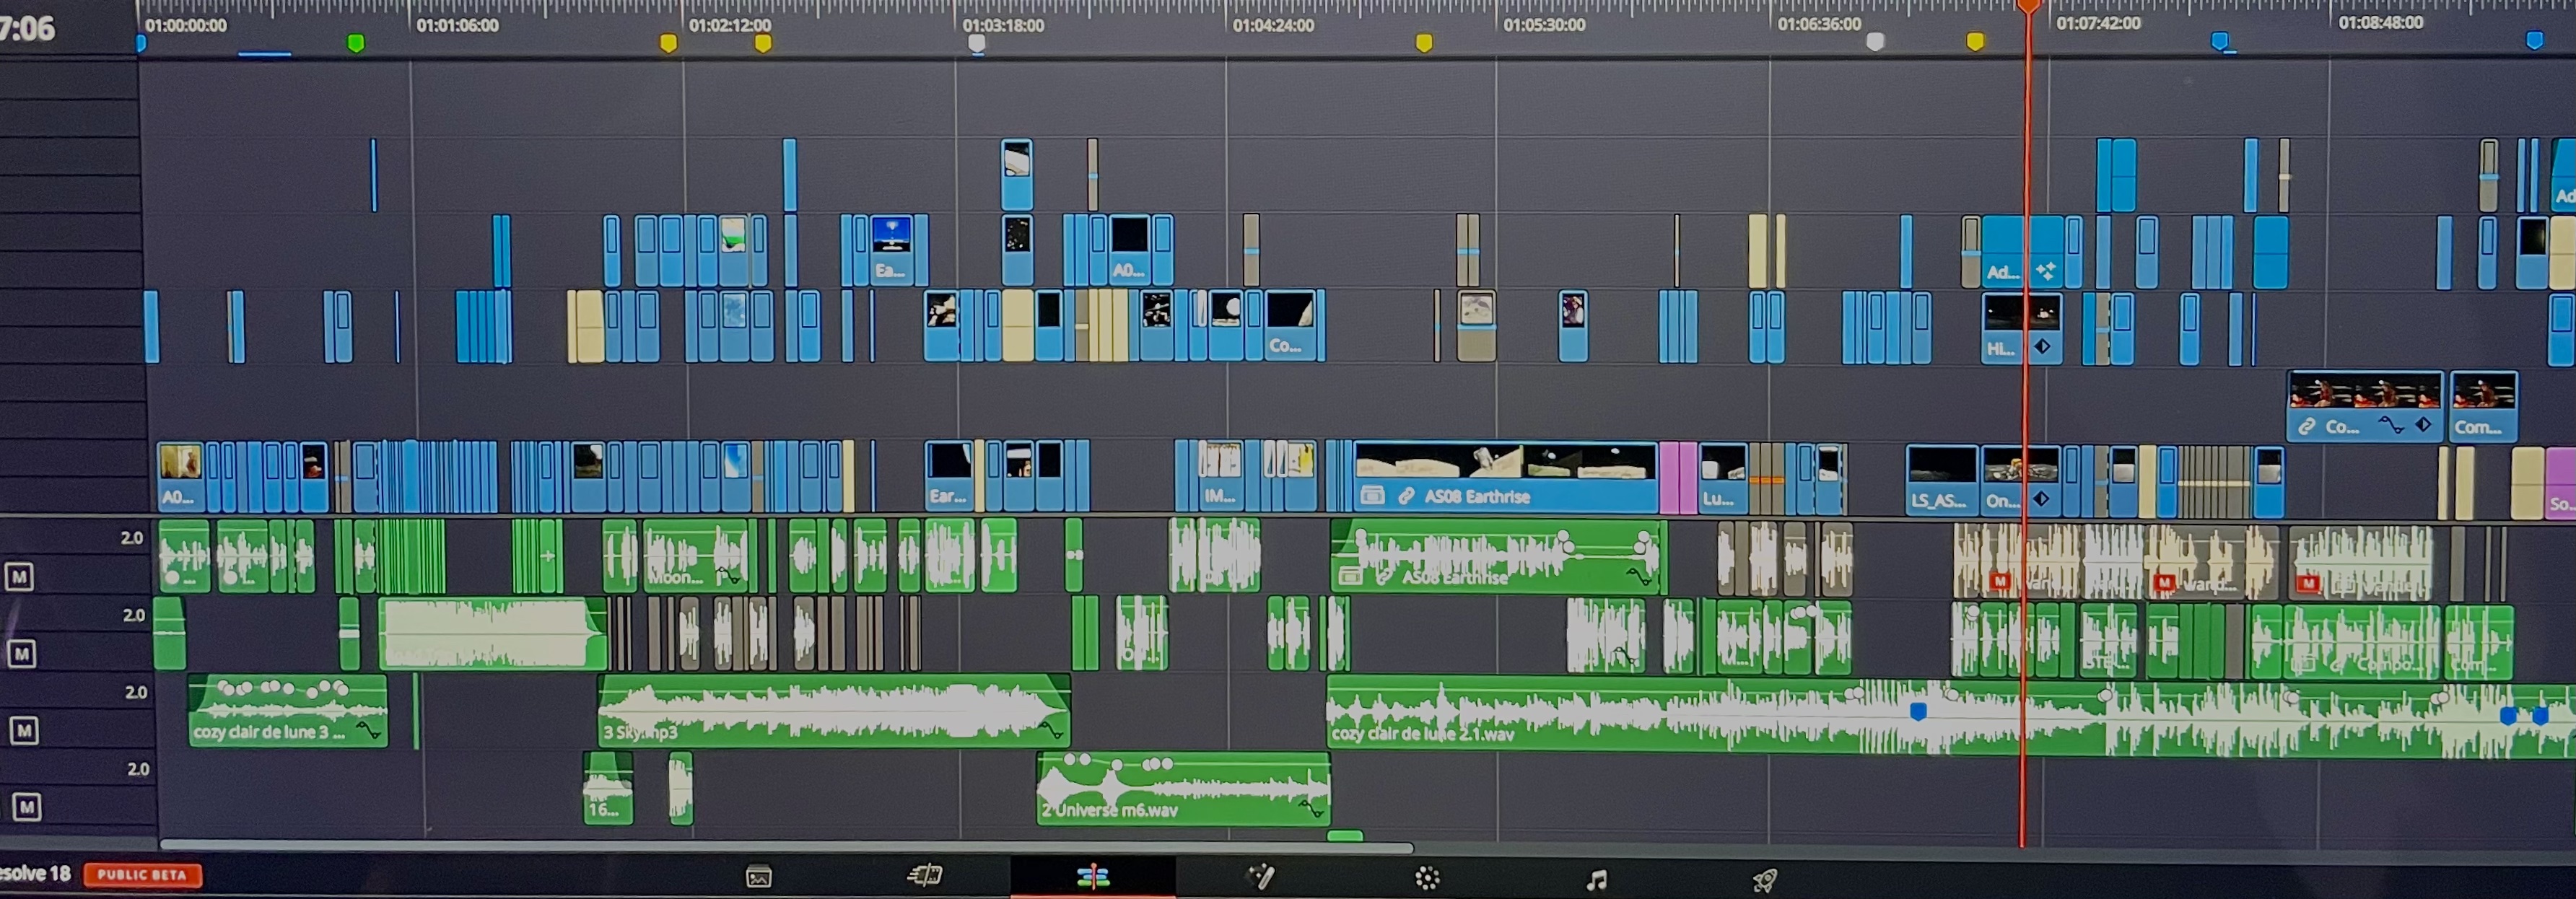 the final timeline in Resolve